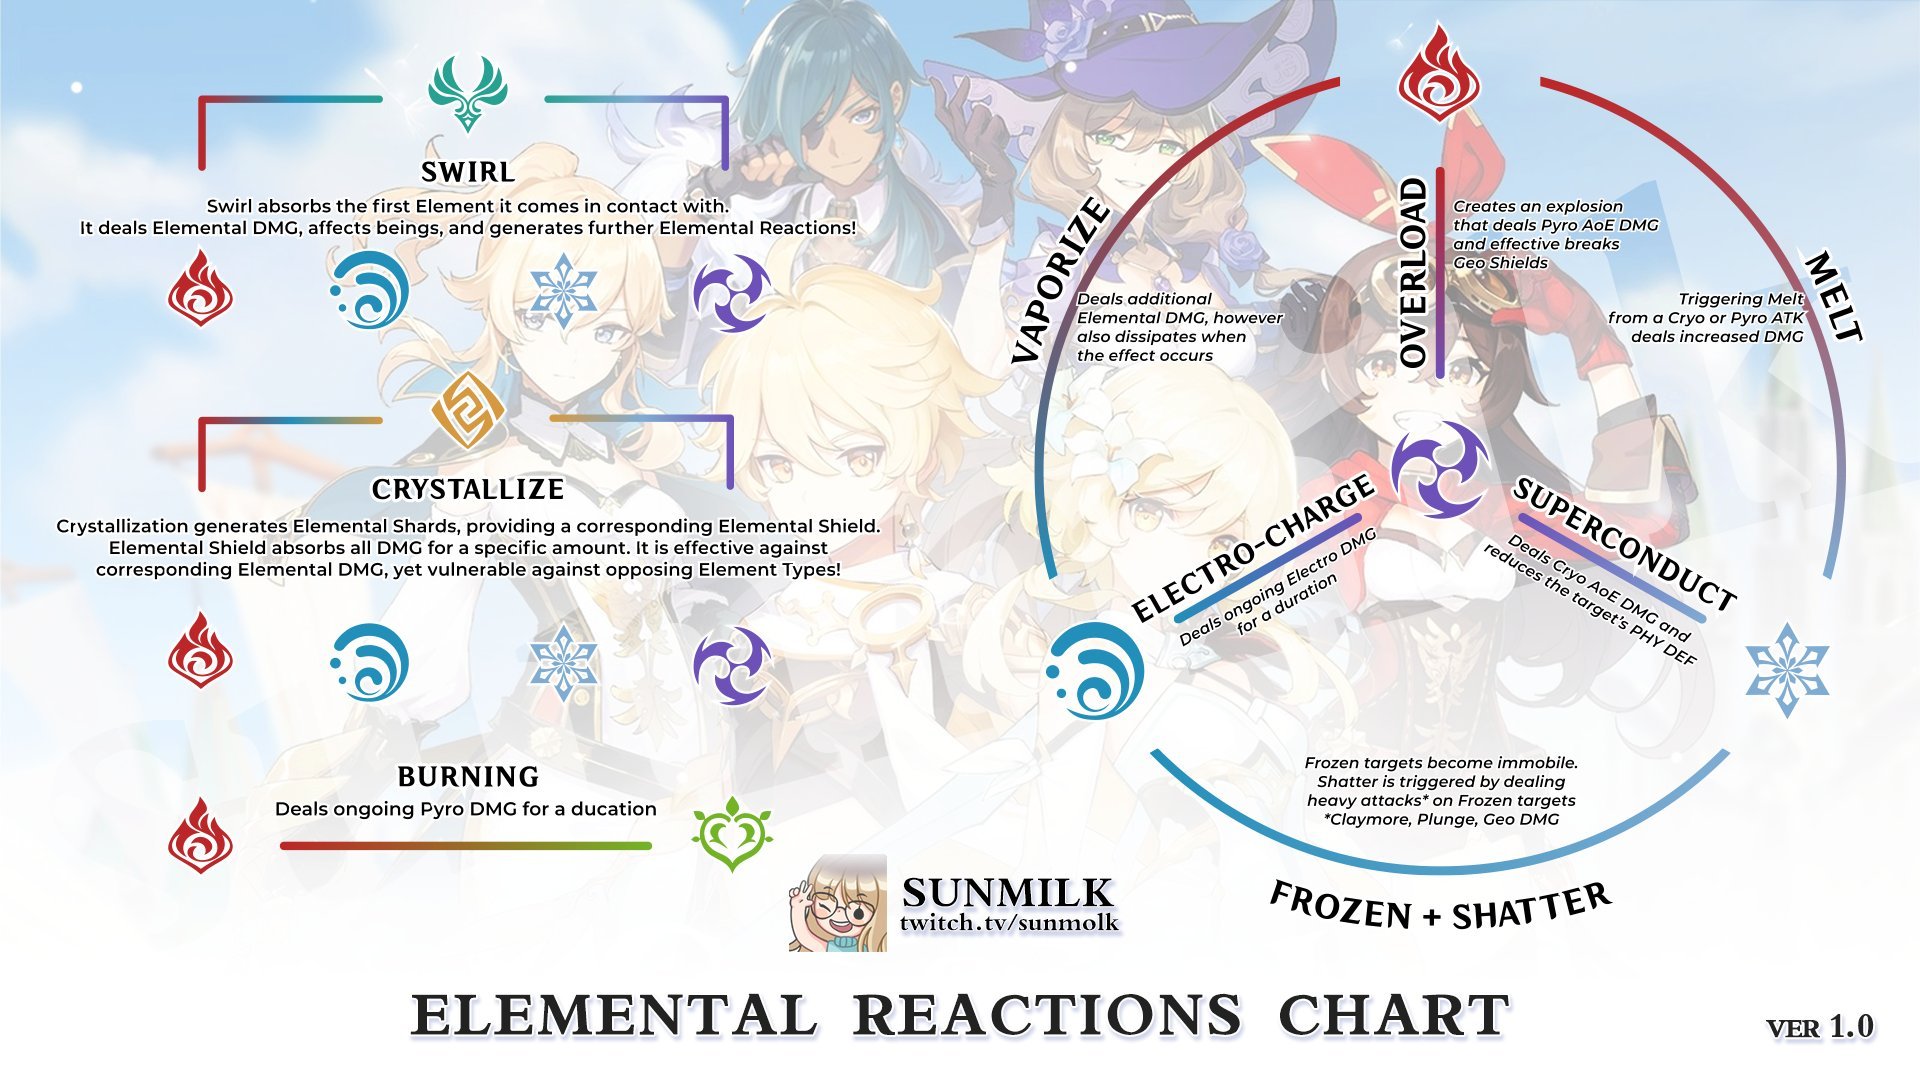 Genshin Impact Elemental Reactions Explained | Images and Photos finder